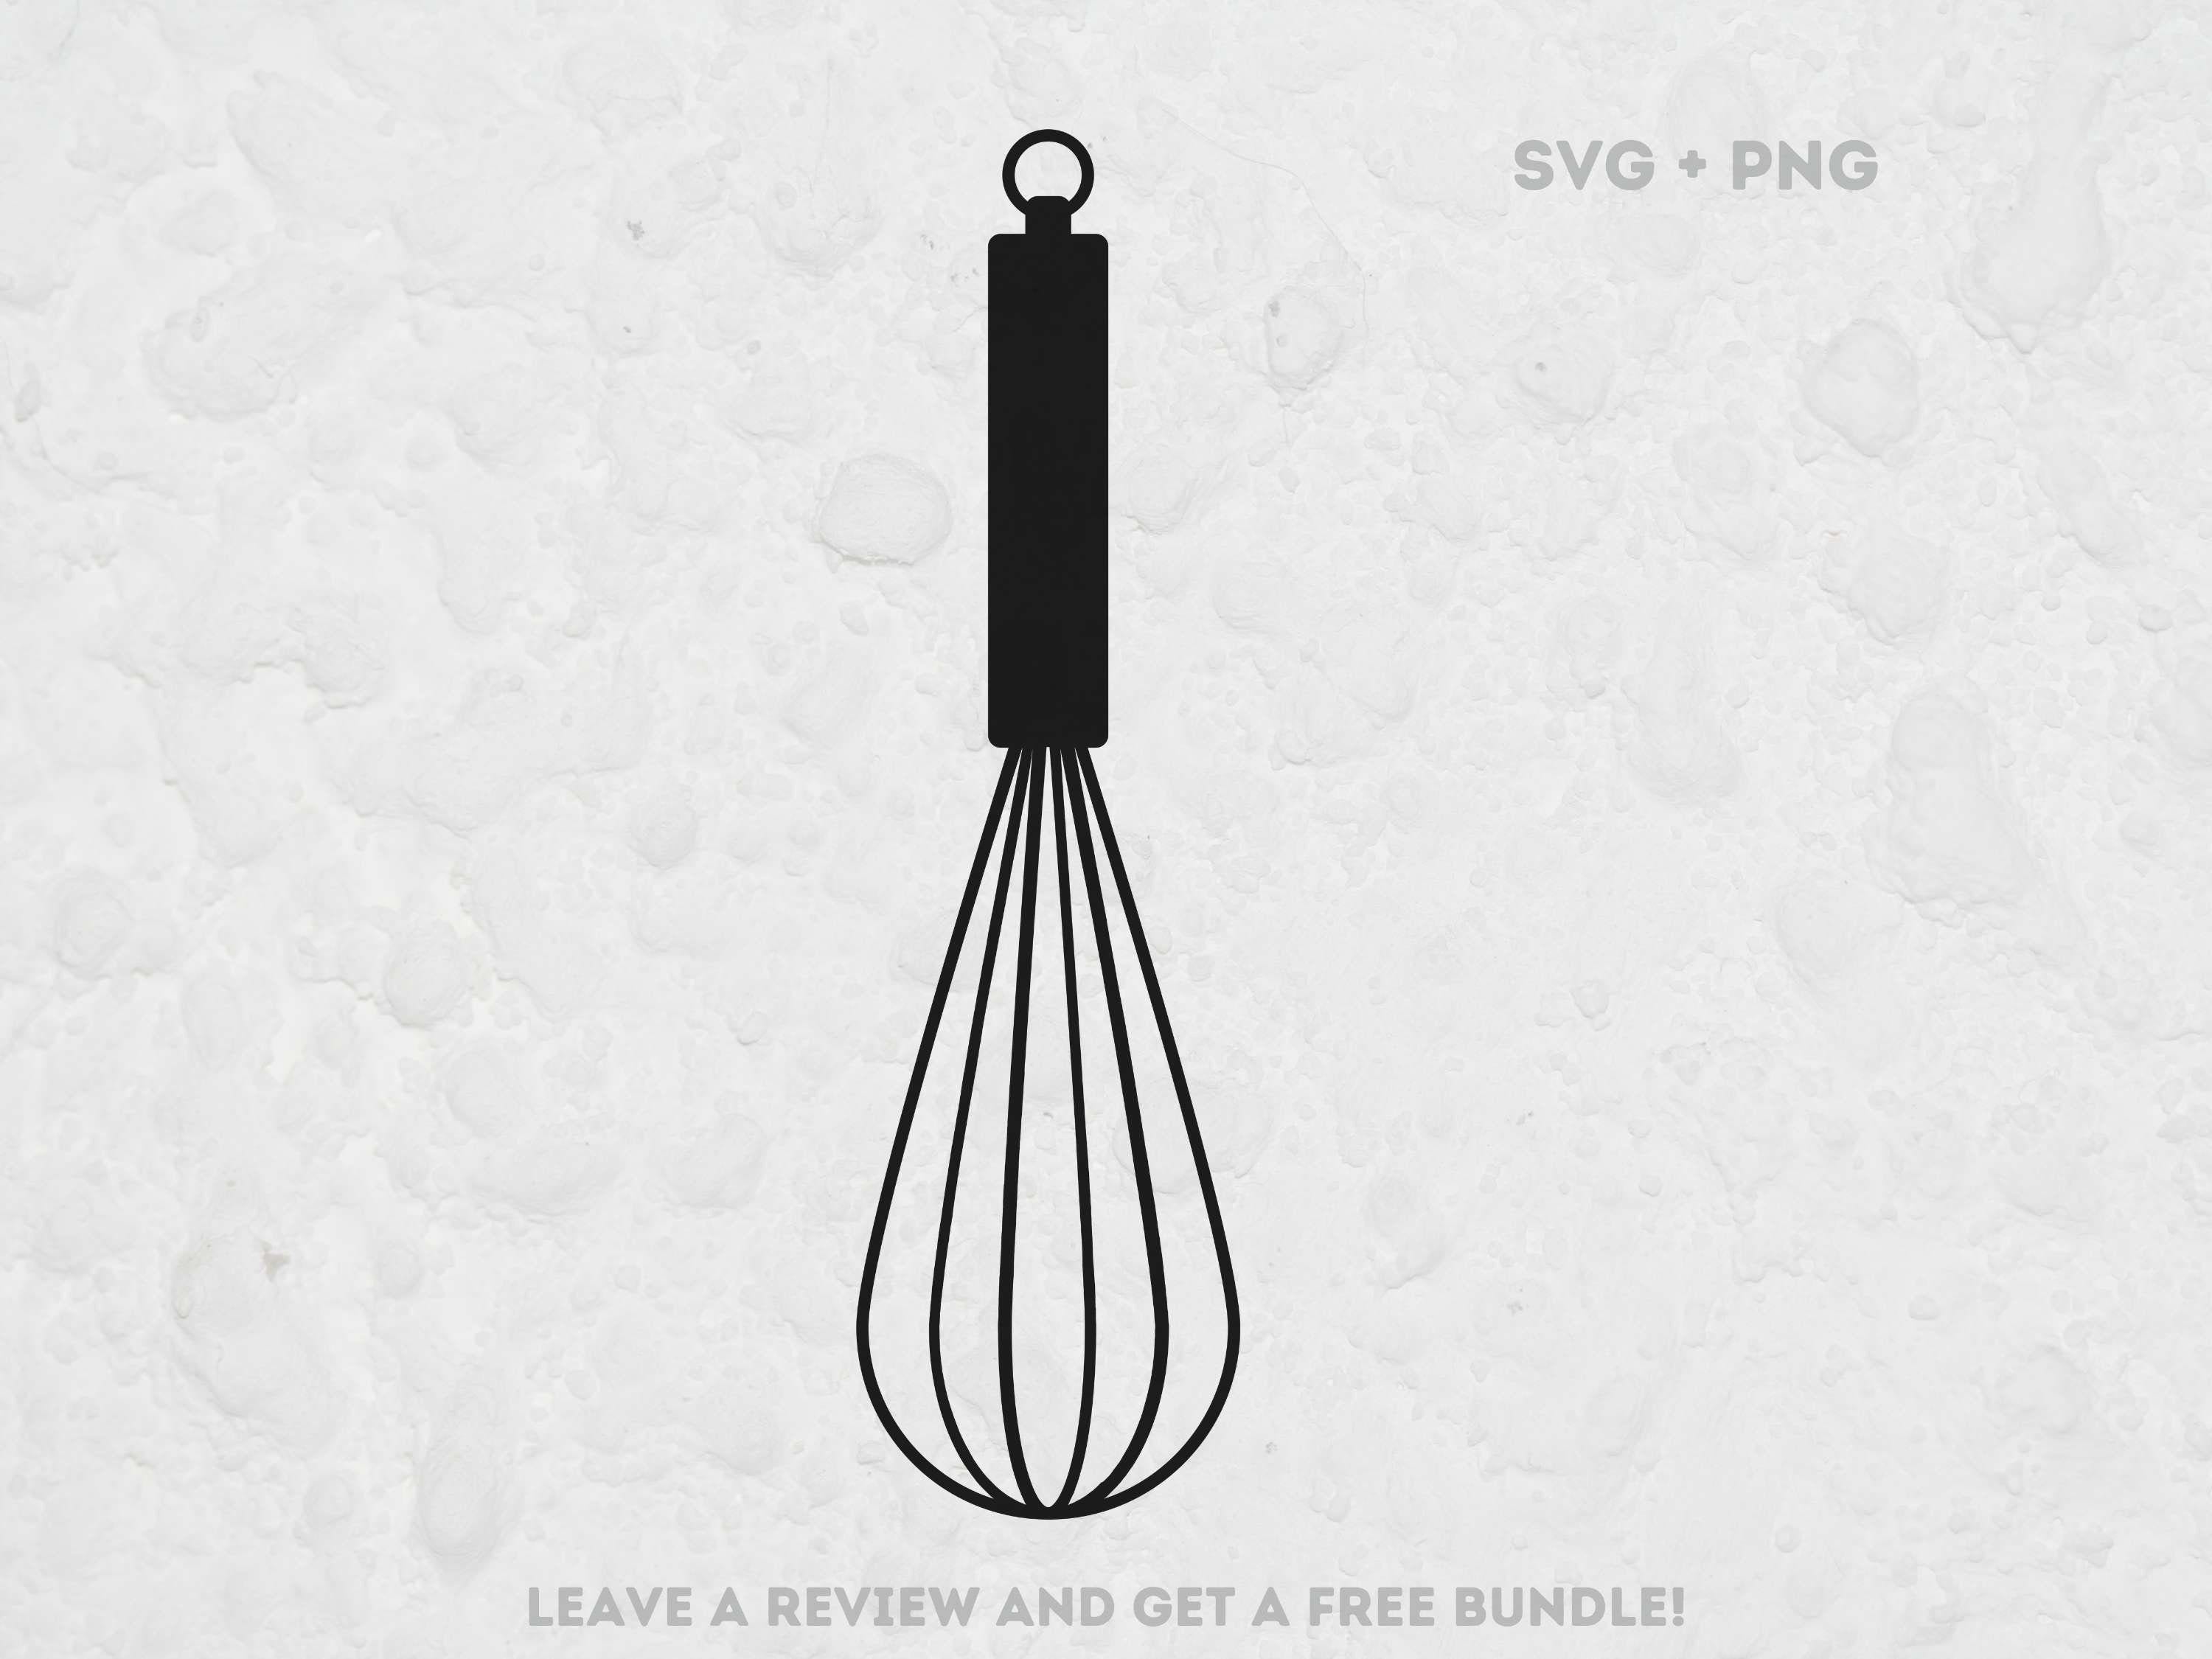 Whisk Svg, SVG Files for Cricut, Whisk Png, Baking SVG, Whisk Silhouette, Whisk Clipart, Cooking Svg, Cooking Clipart, Kitchen Tool SVG